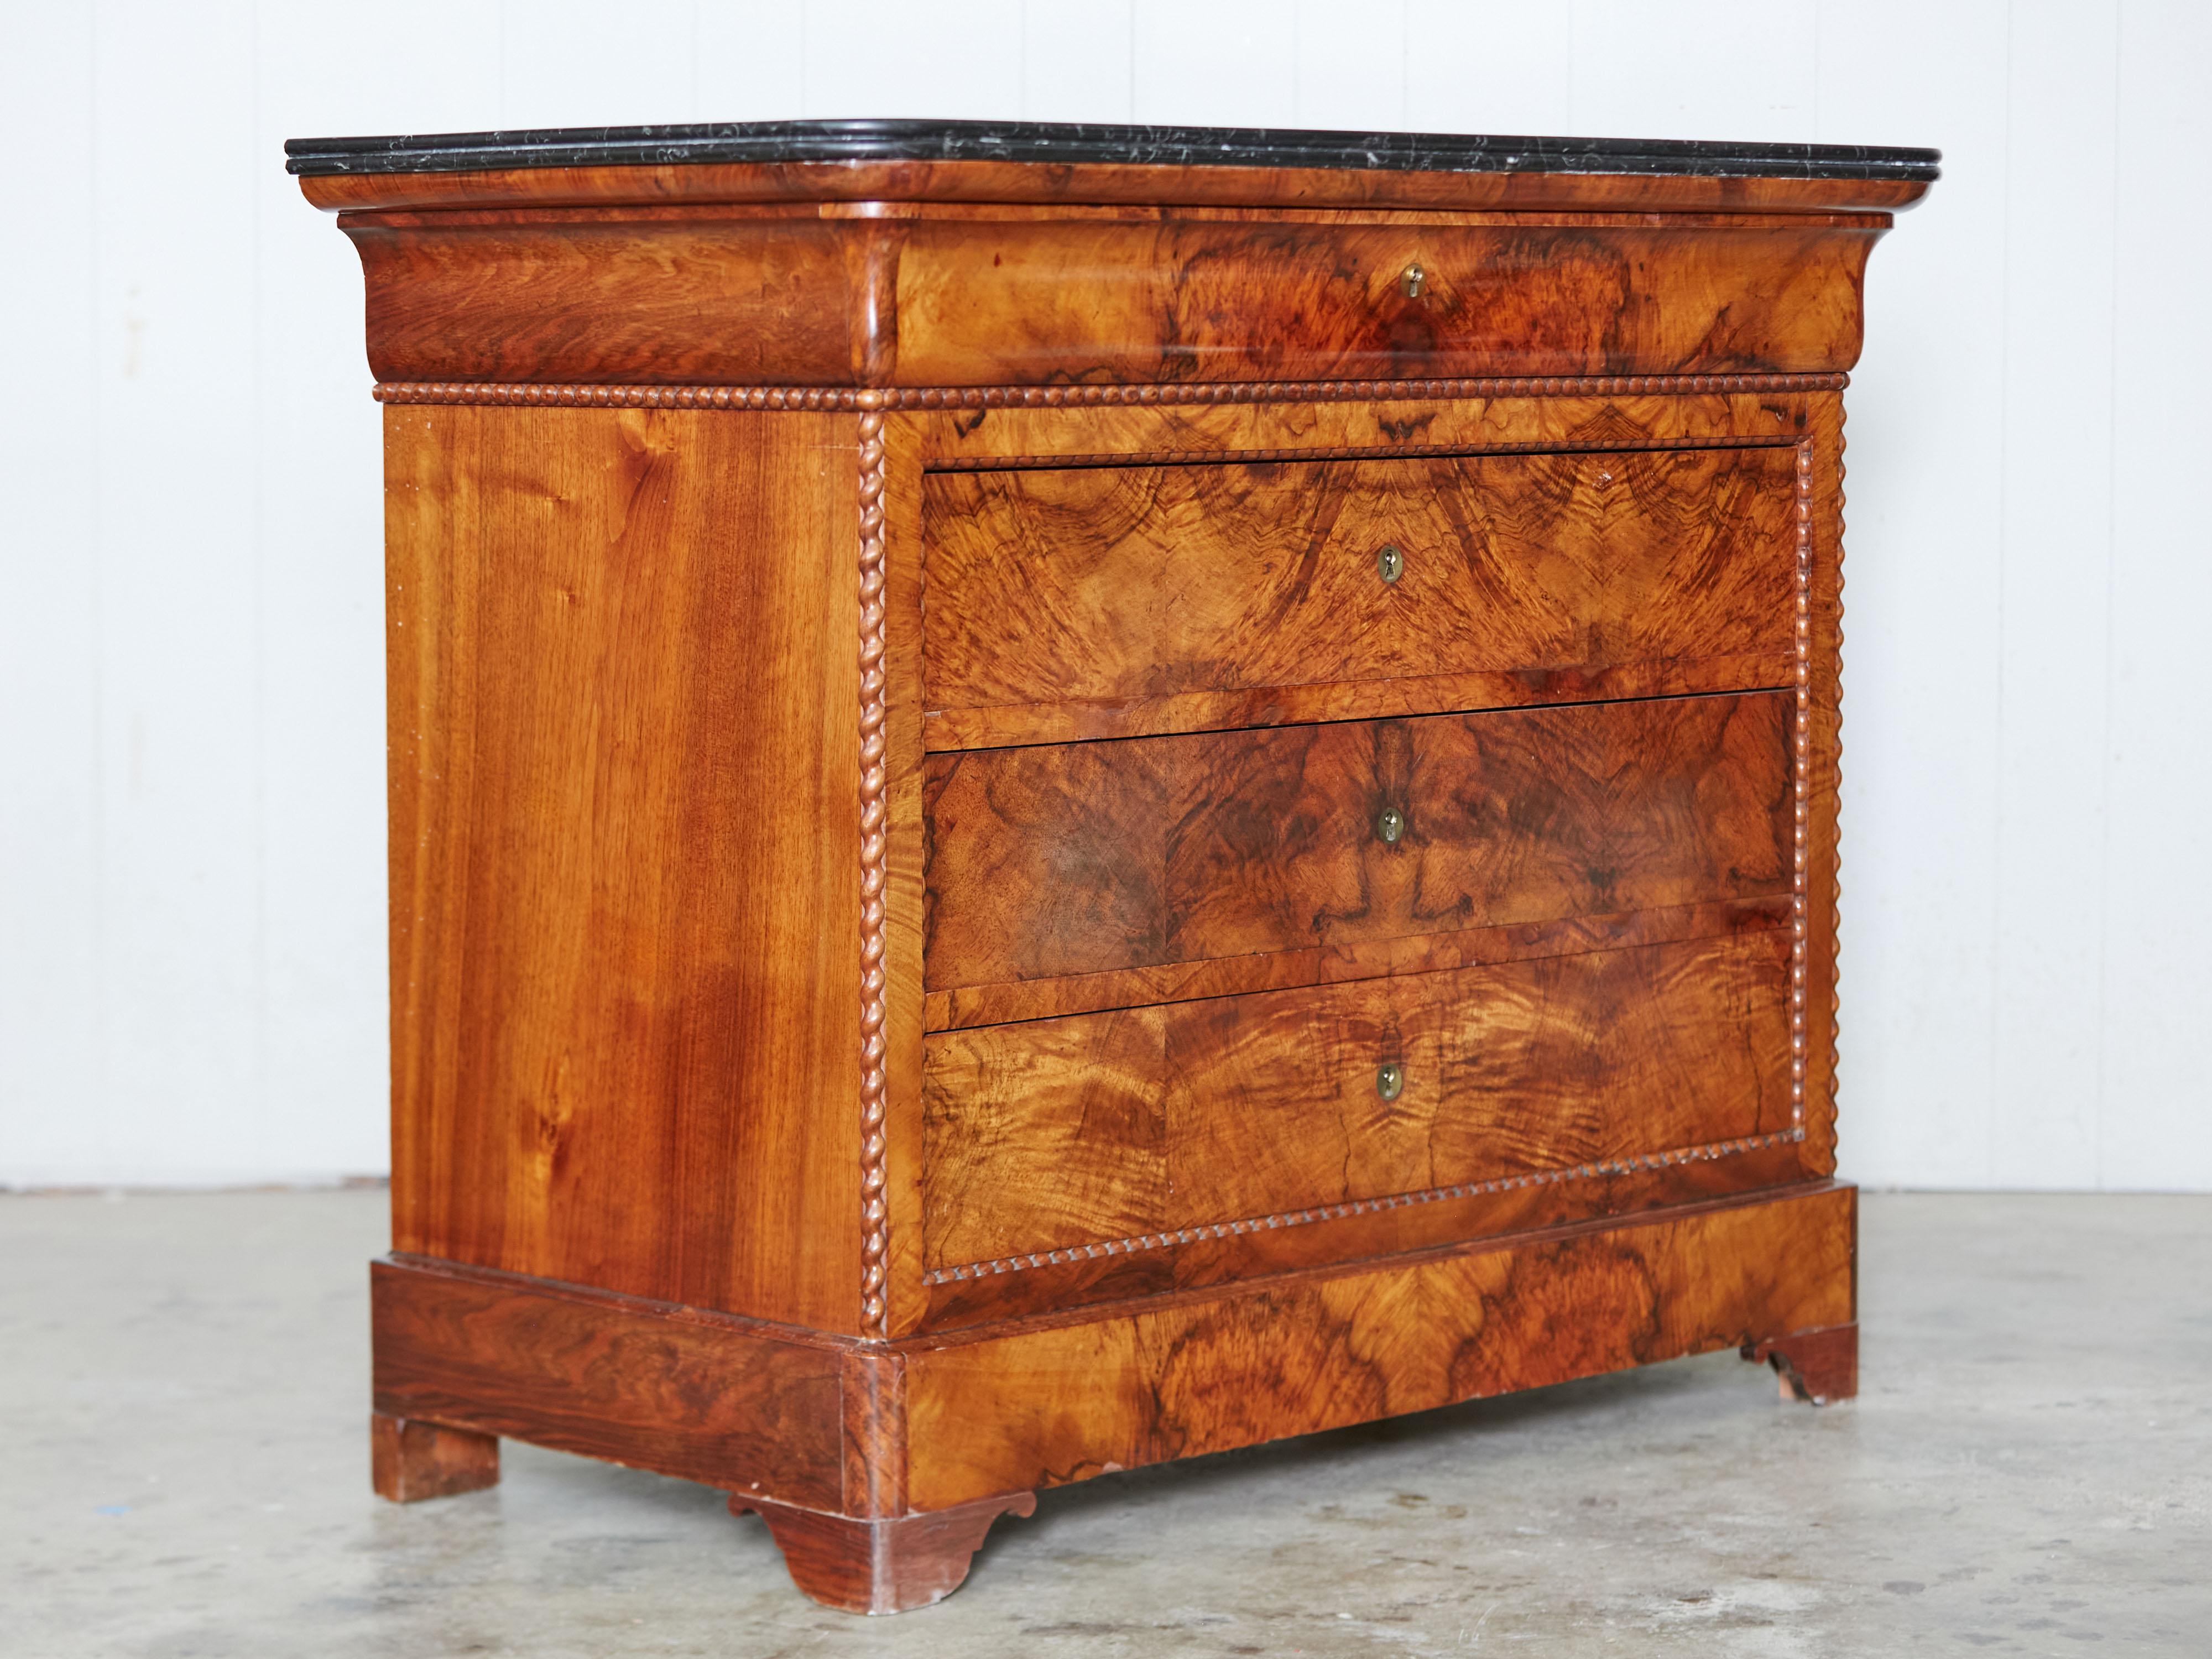 A French Louis-Philippe style walnut commode from the late 19th century, with black marble top and four drawers. Created in France during the third quarter of the 19th century, this walnut commode features a black rectangular top with rounded